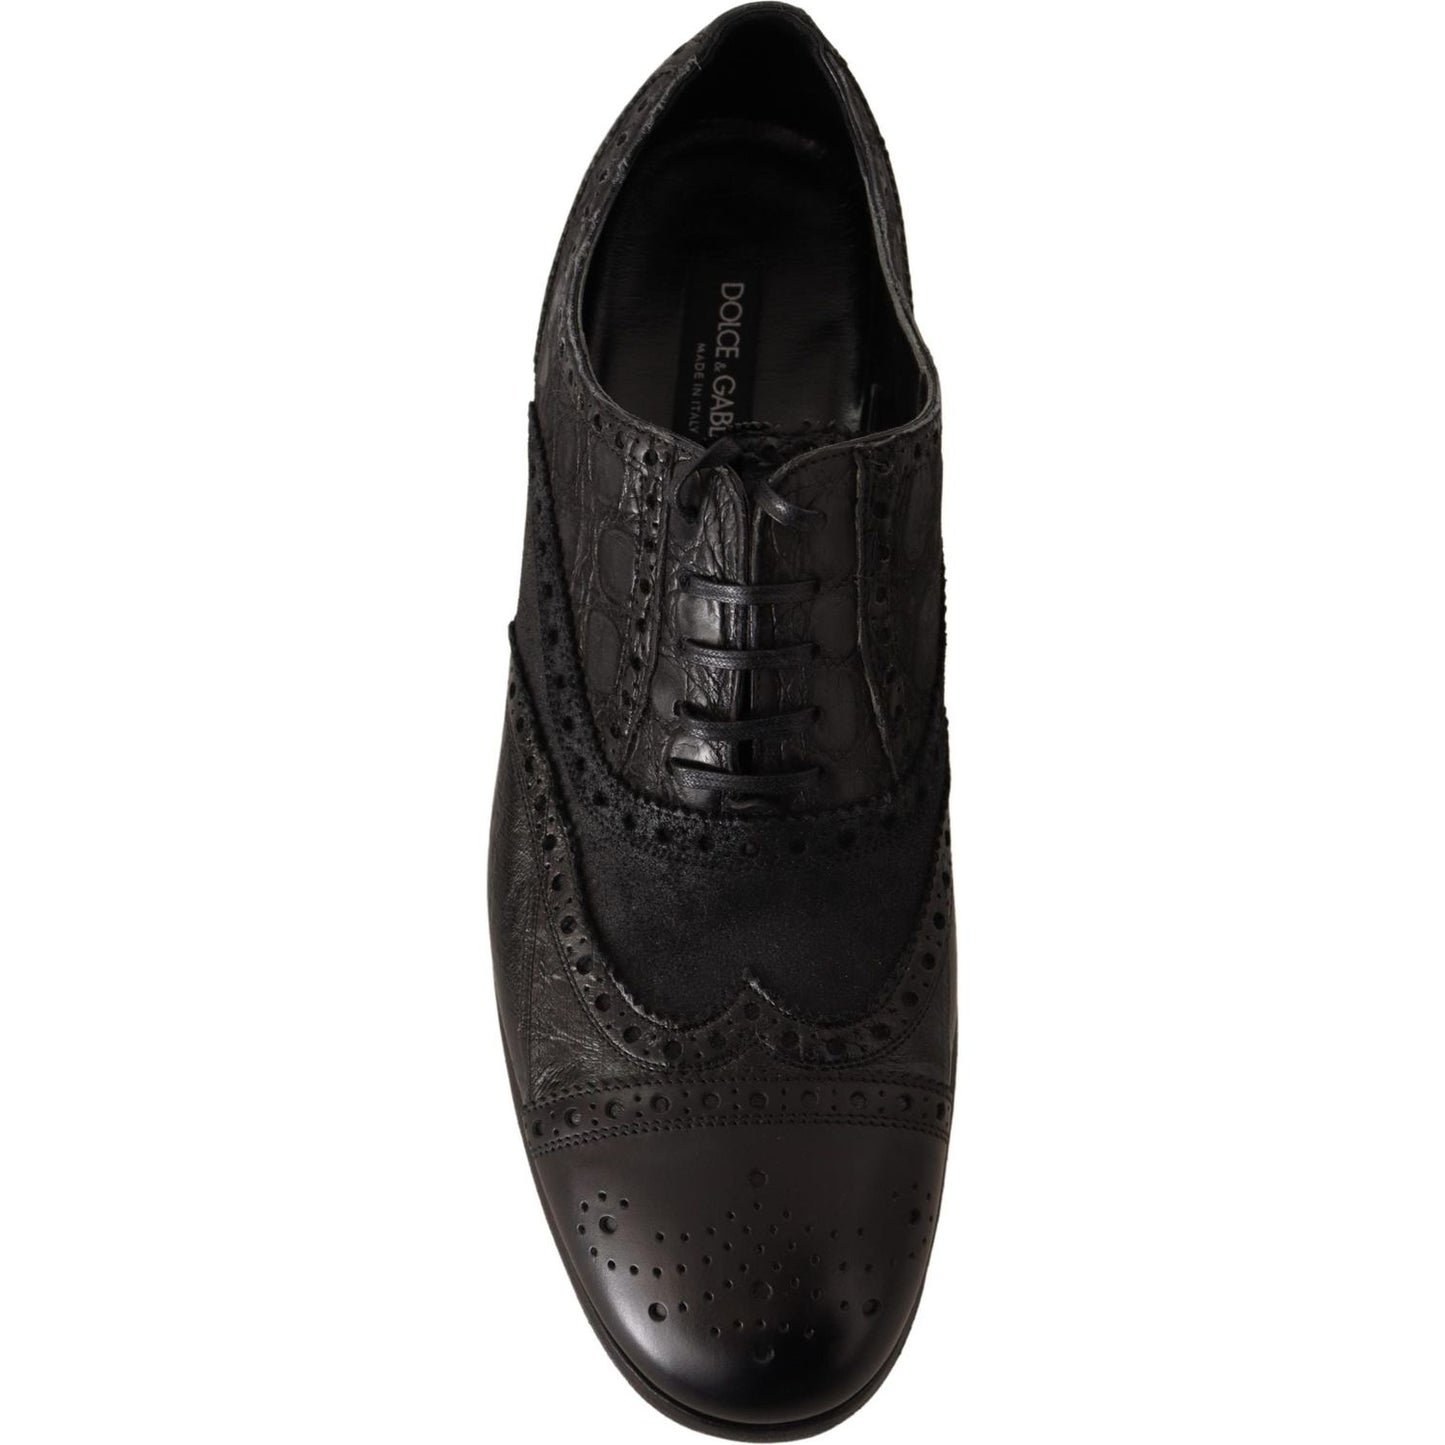 Dolce & Gabbana Exotic Leather Brogue Derby Dress Shoes MAN LOAFERS black-leather-brogue-wing-tip-men-formal-shoes